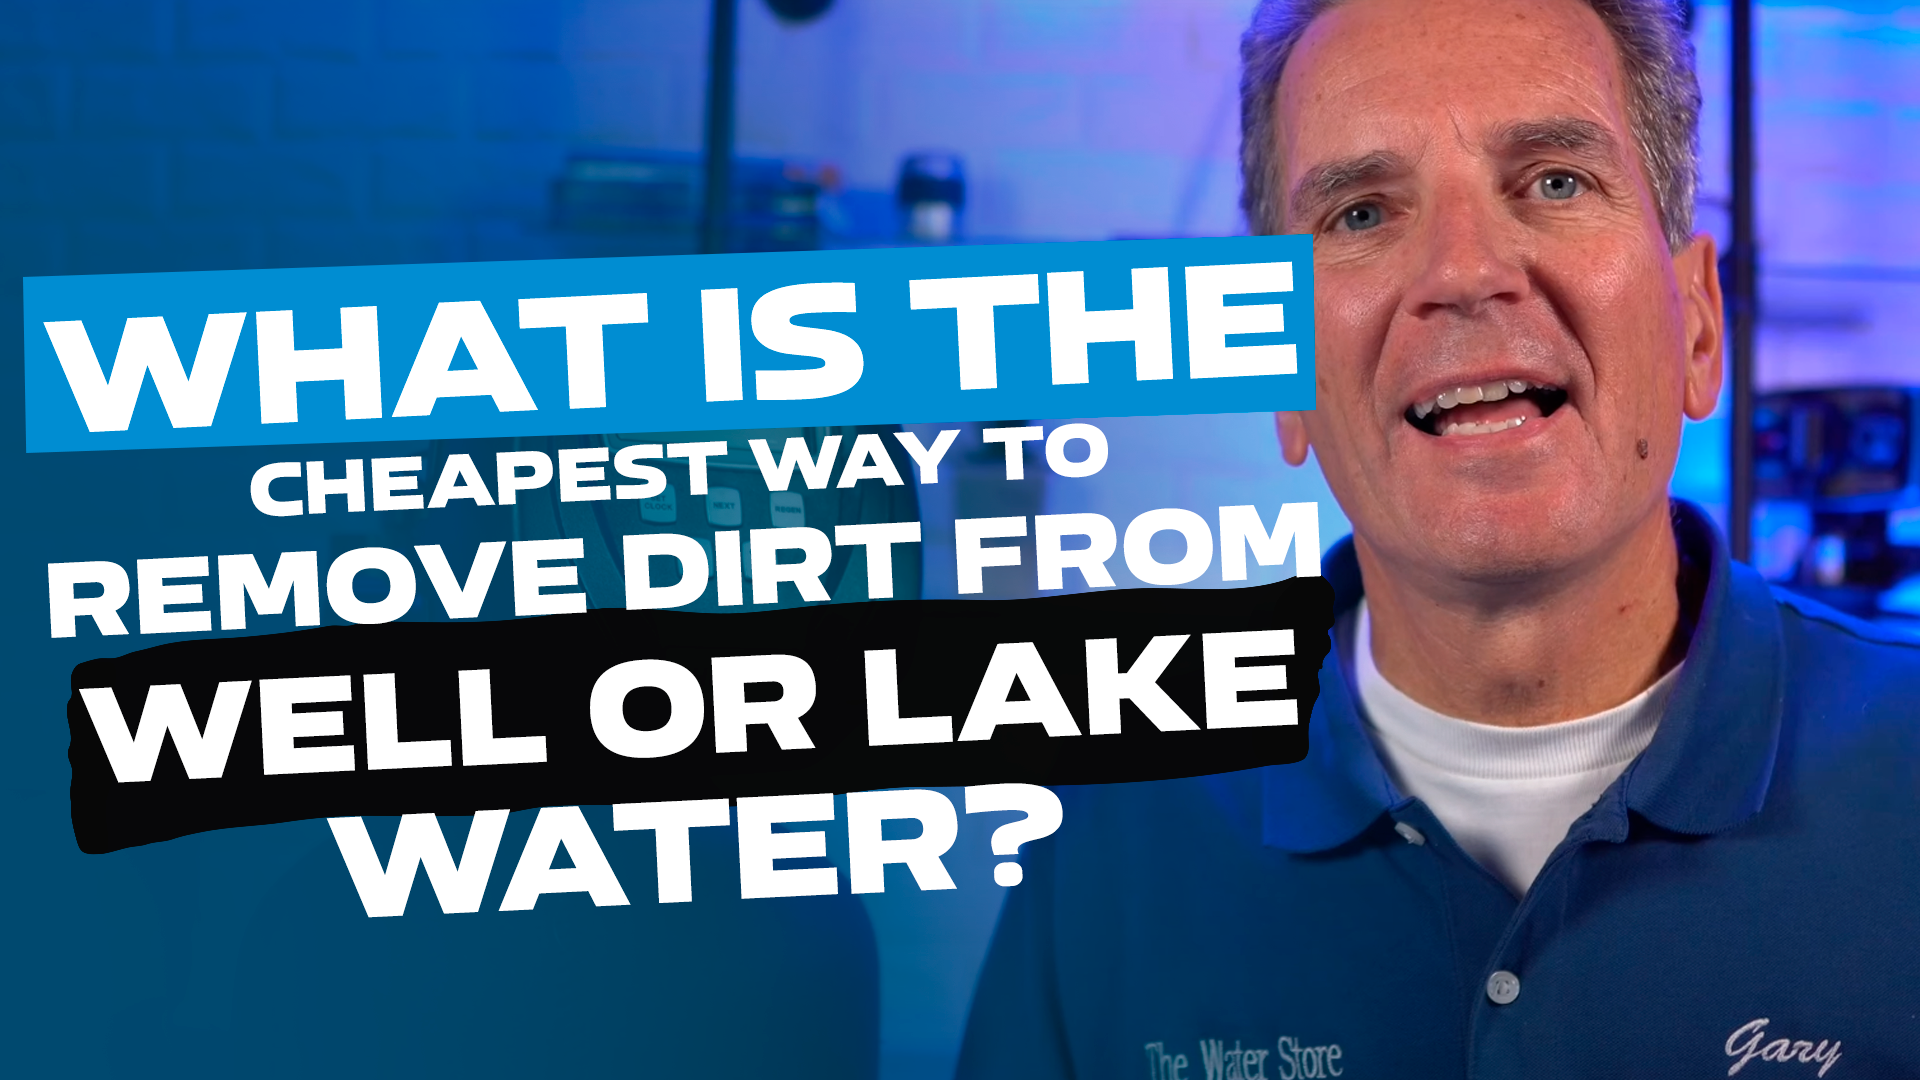 What is the Cheapest Way to Remove Dirt From My Well or Lake Water?